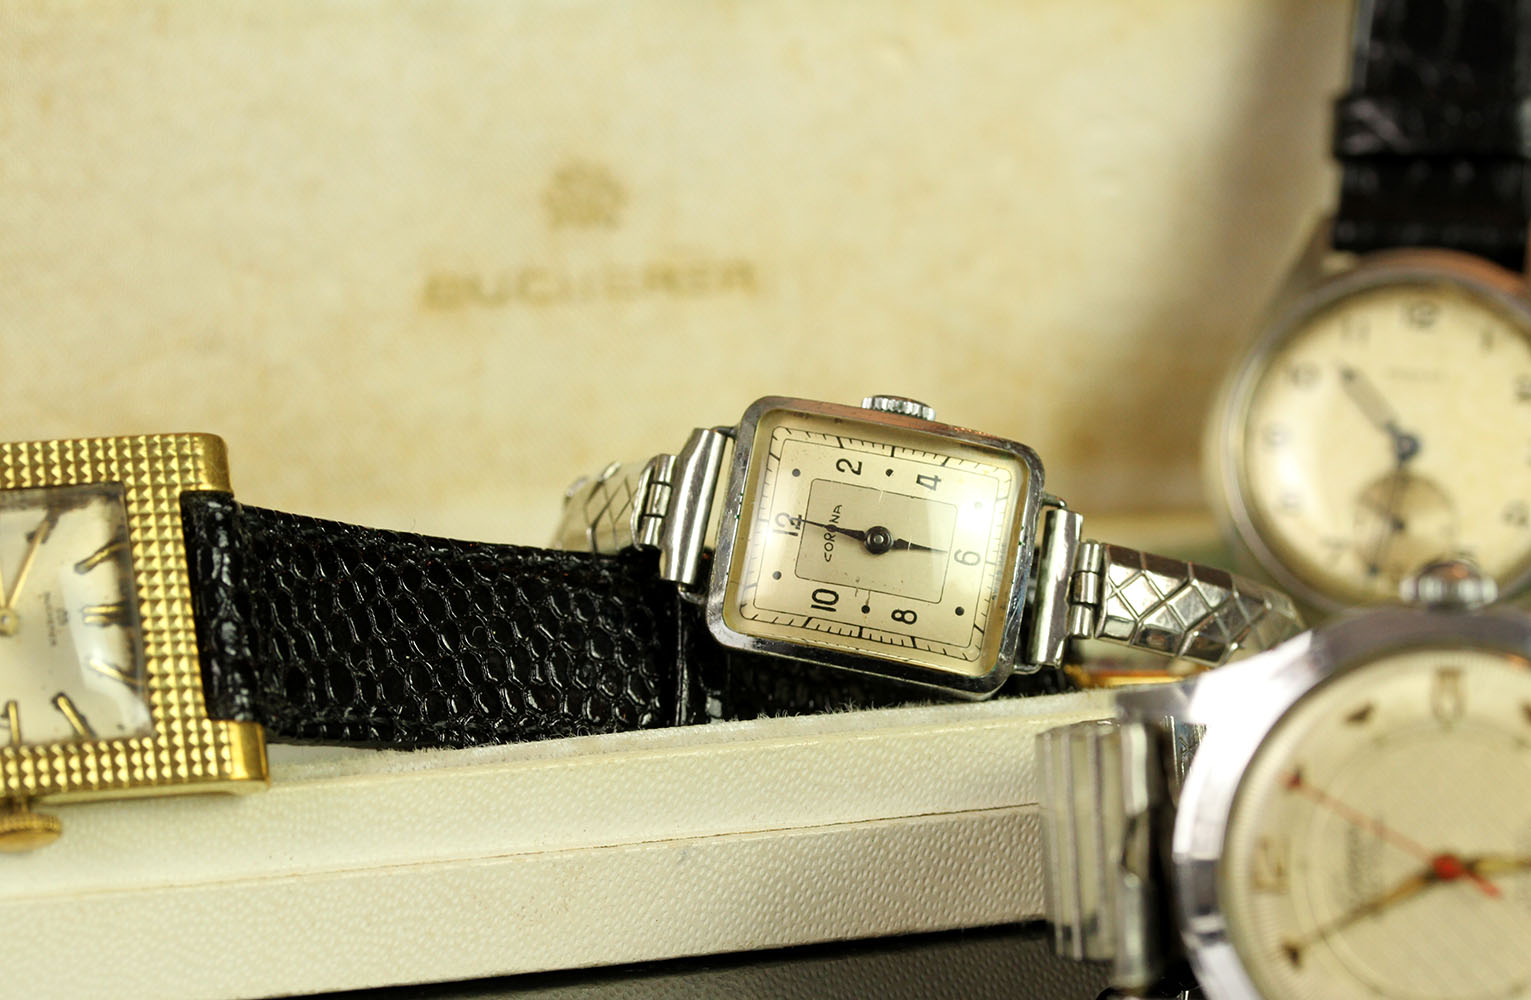 GROUP OF 5 VINTAGE WRISTWATCHES, 1 bucherer watch currently running with box, 1 peerex watch - Image 4 of 4